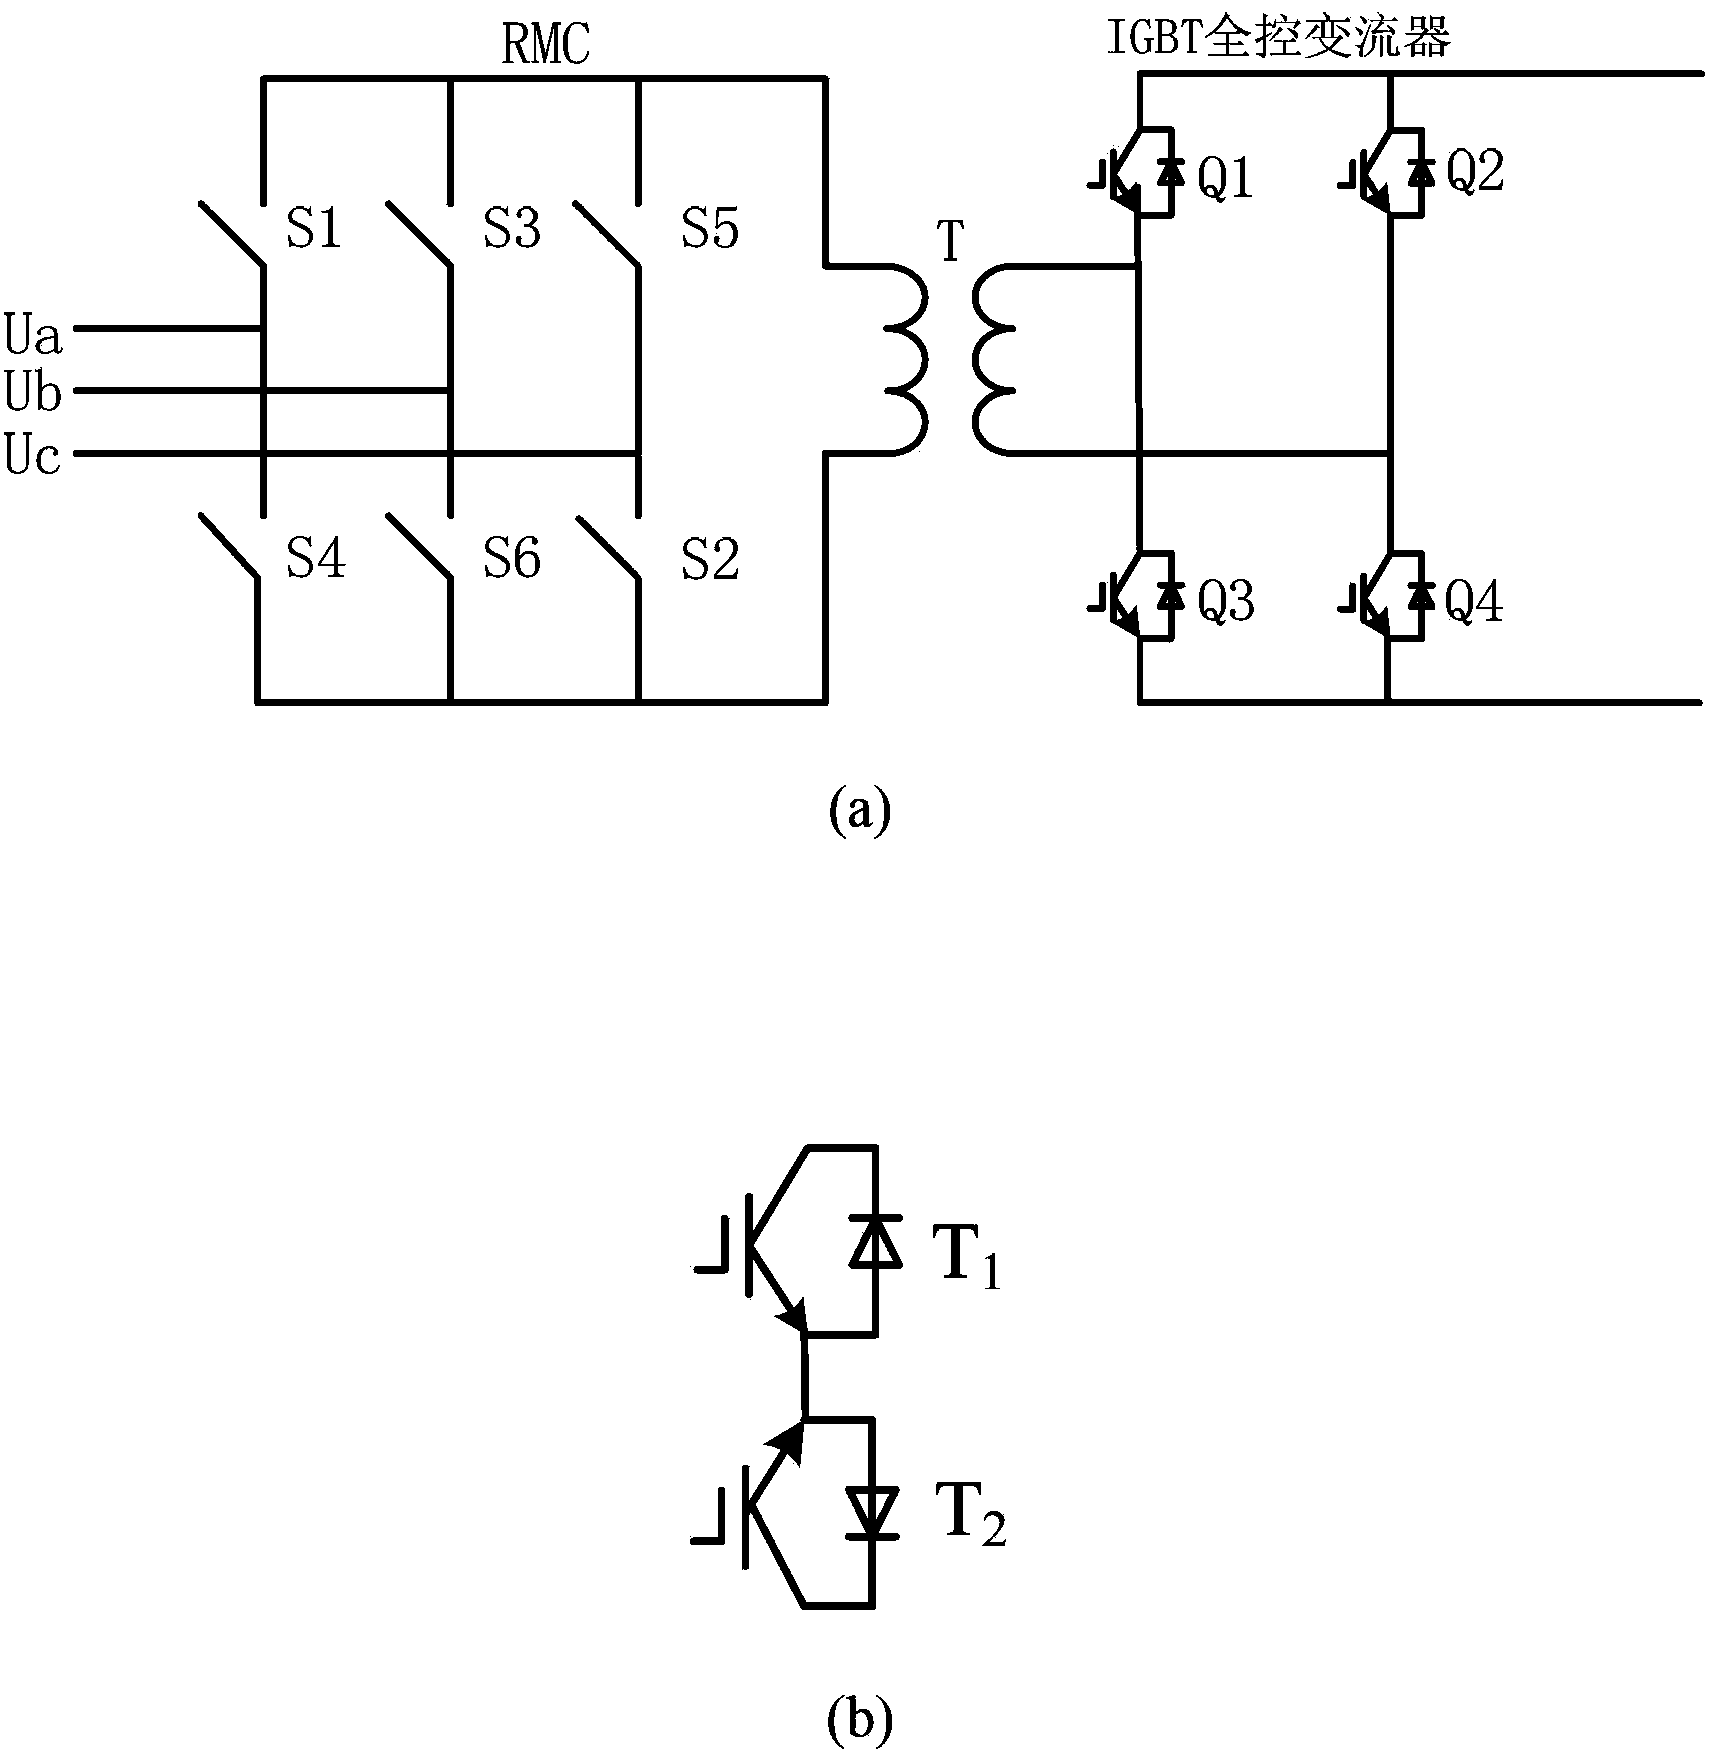 DFIG direct current grid-connected power generation system based on RMC and torque control method of DFIG direct current grid-connected power generation system